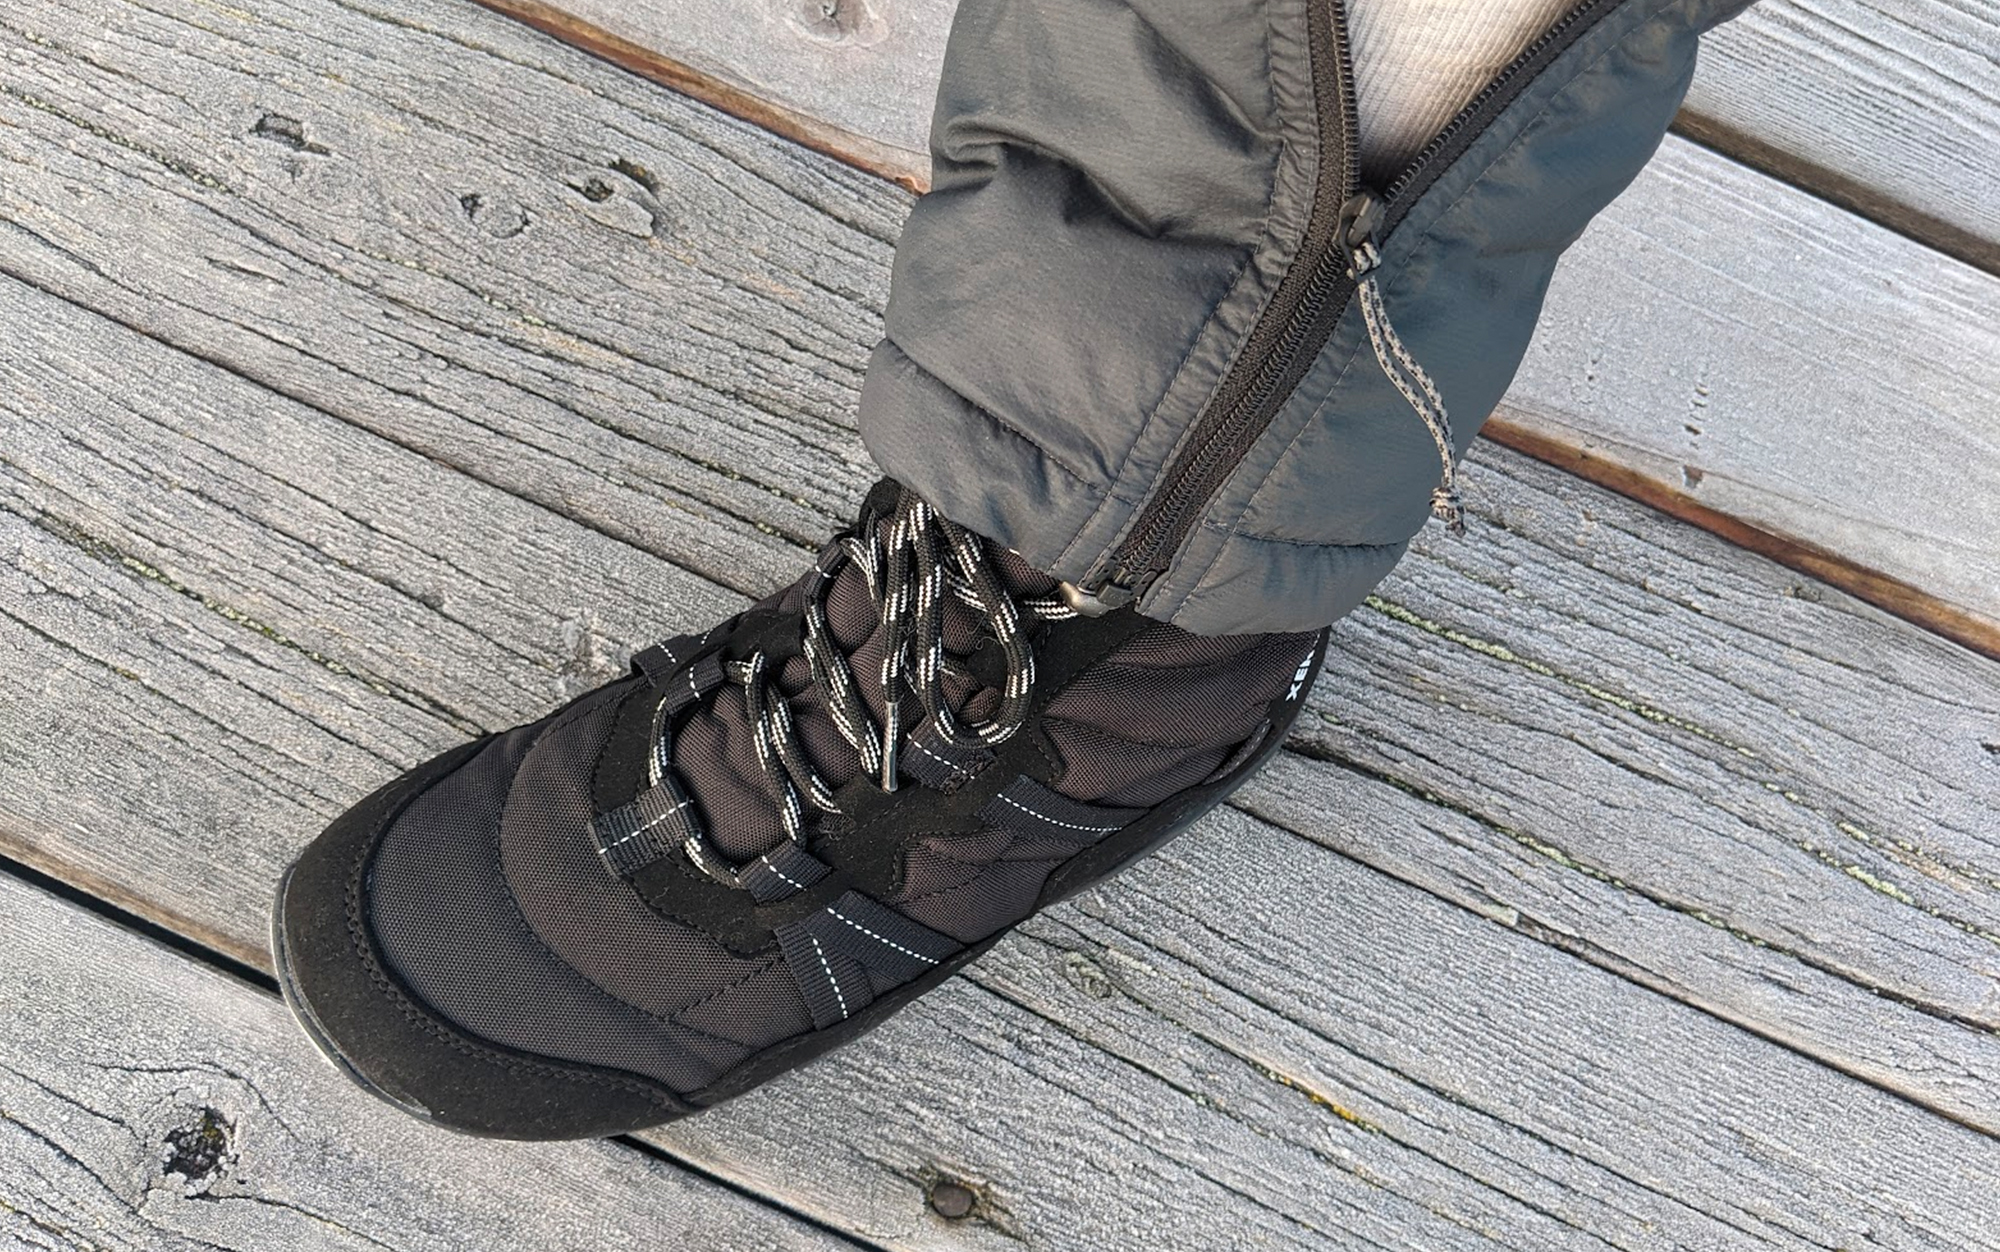 The one-way zipper on the Kuiu meant that the only way to take off the pants without taking off my shoes was to zip them into two separate halves.